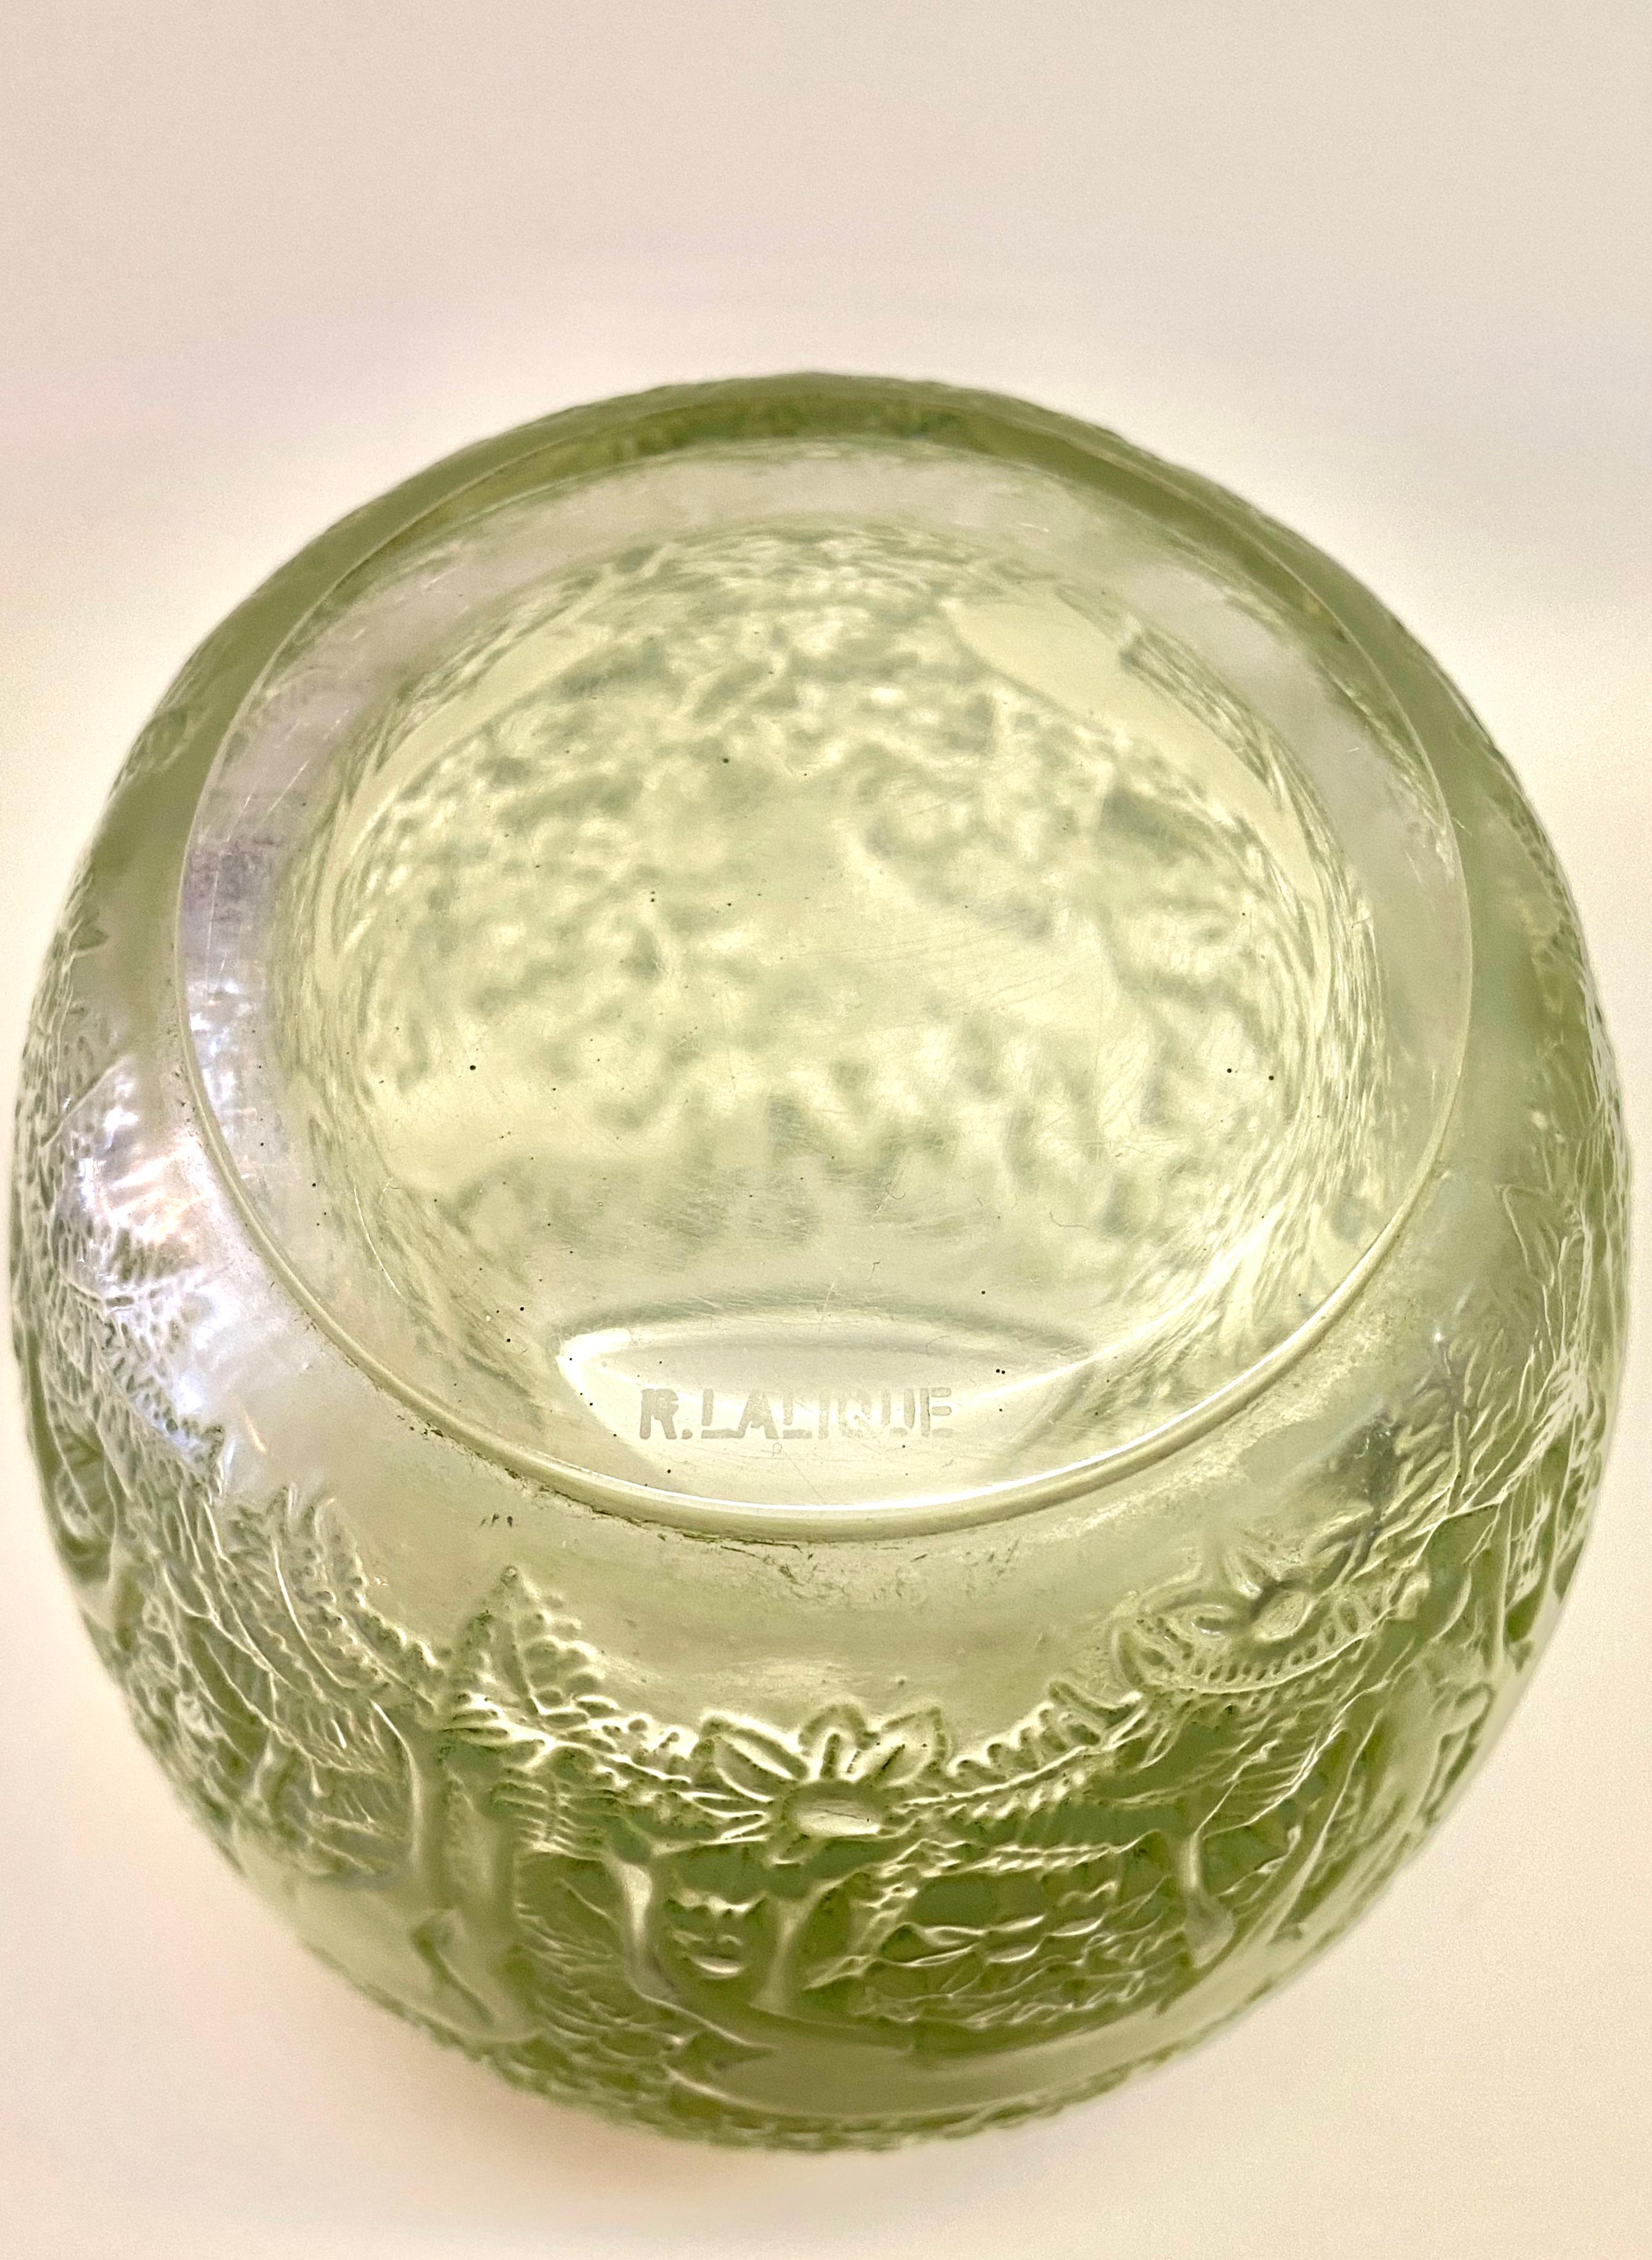 French 1932 René Lalique Original Biches Vase in Frosted Glass with Green Patina